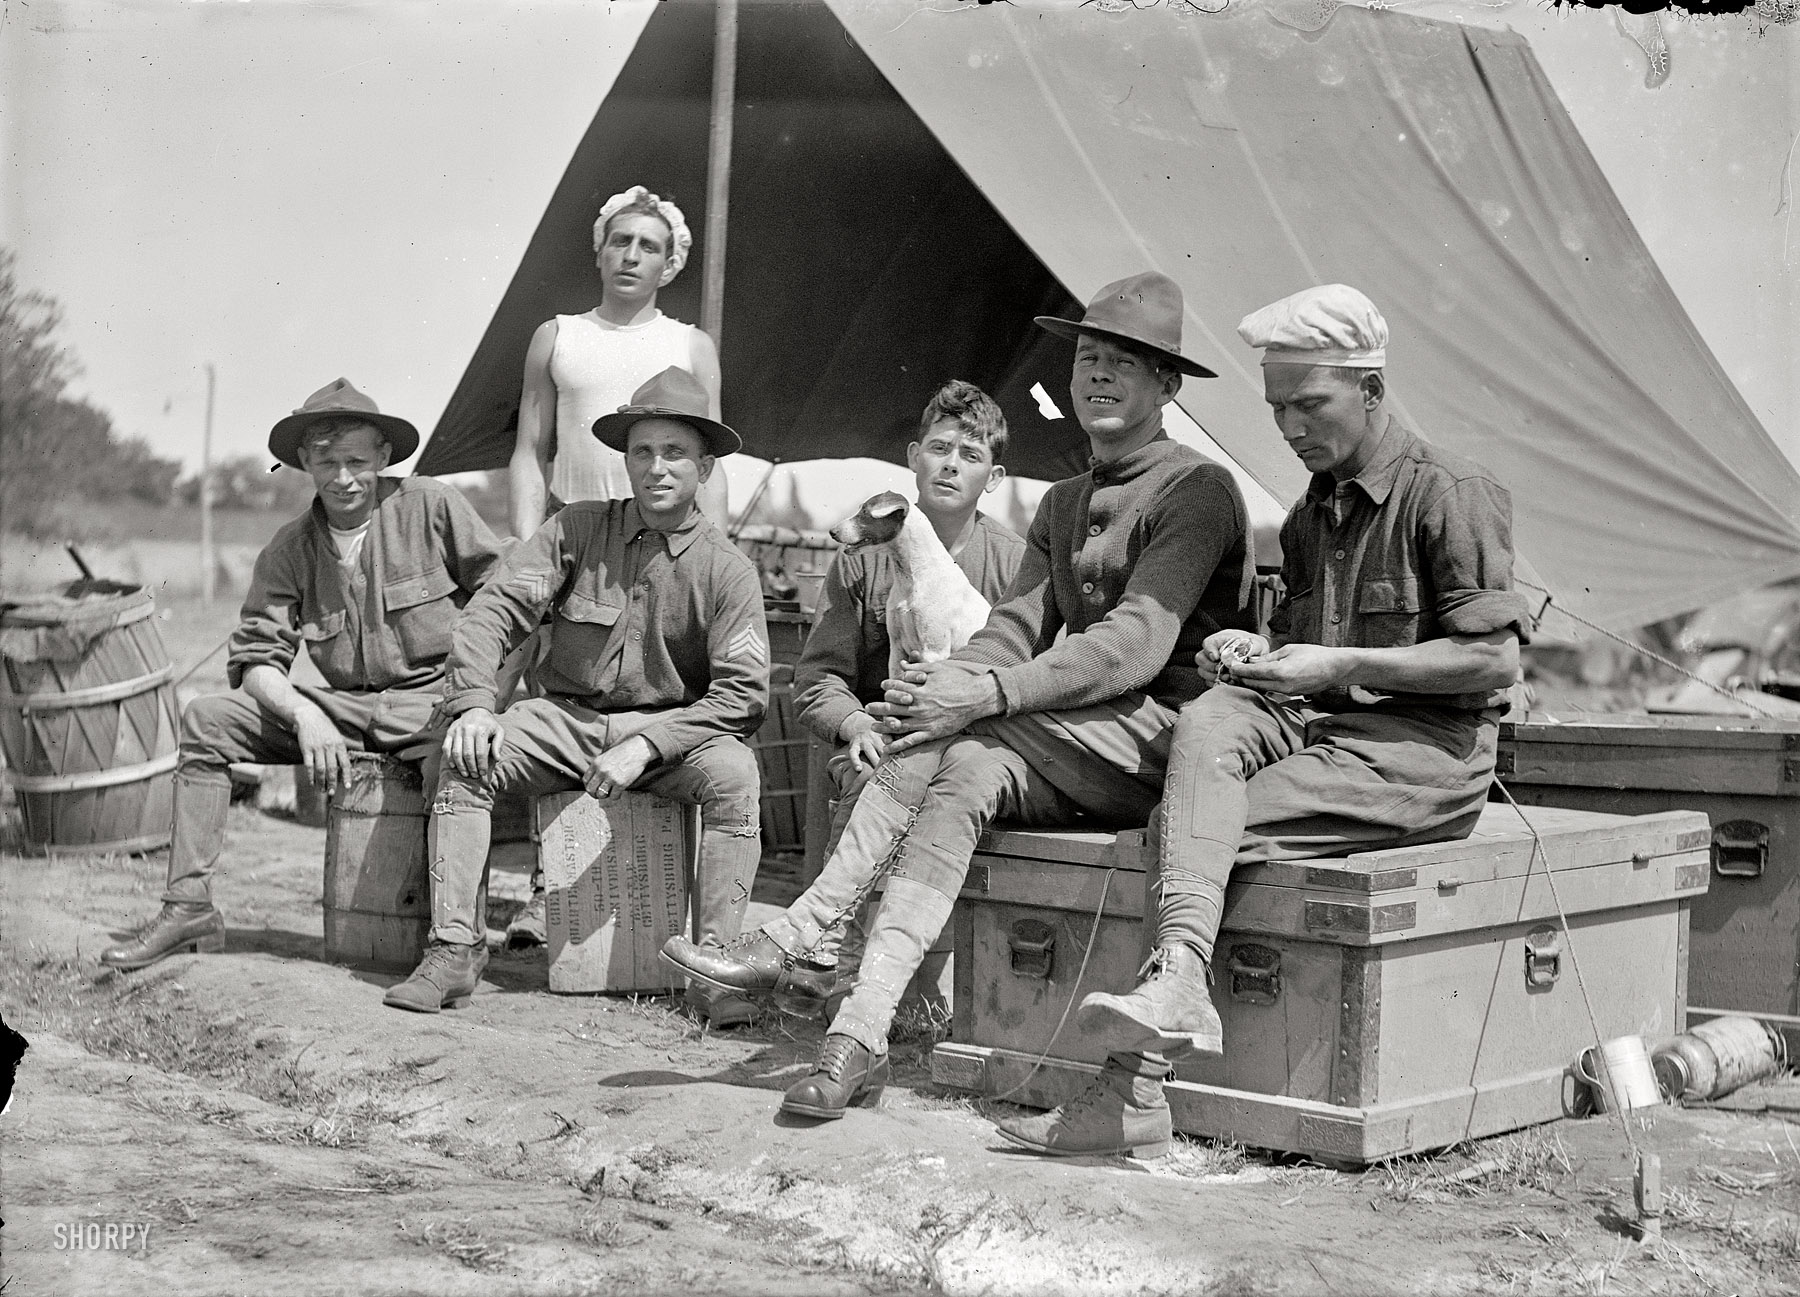 Circa 1913. "Group of soldiers in front of tent." Possibly the National Guard camp at Mount Gretna, Pennsylvania. National Photo glass negative. View full size.